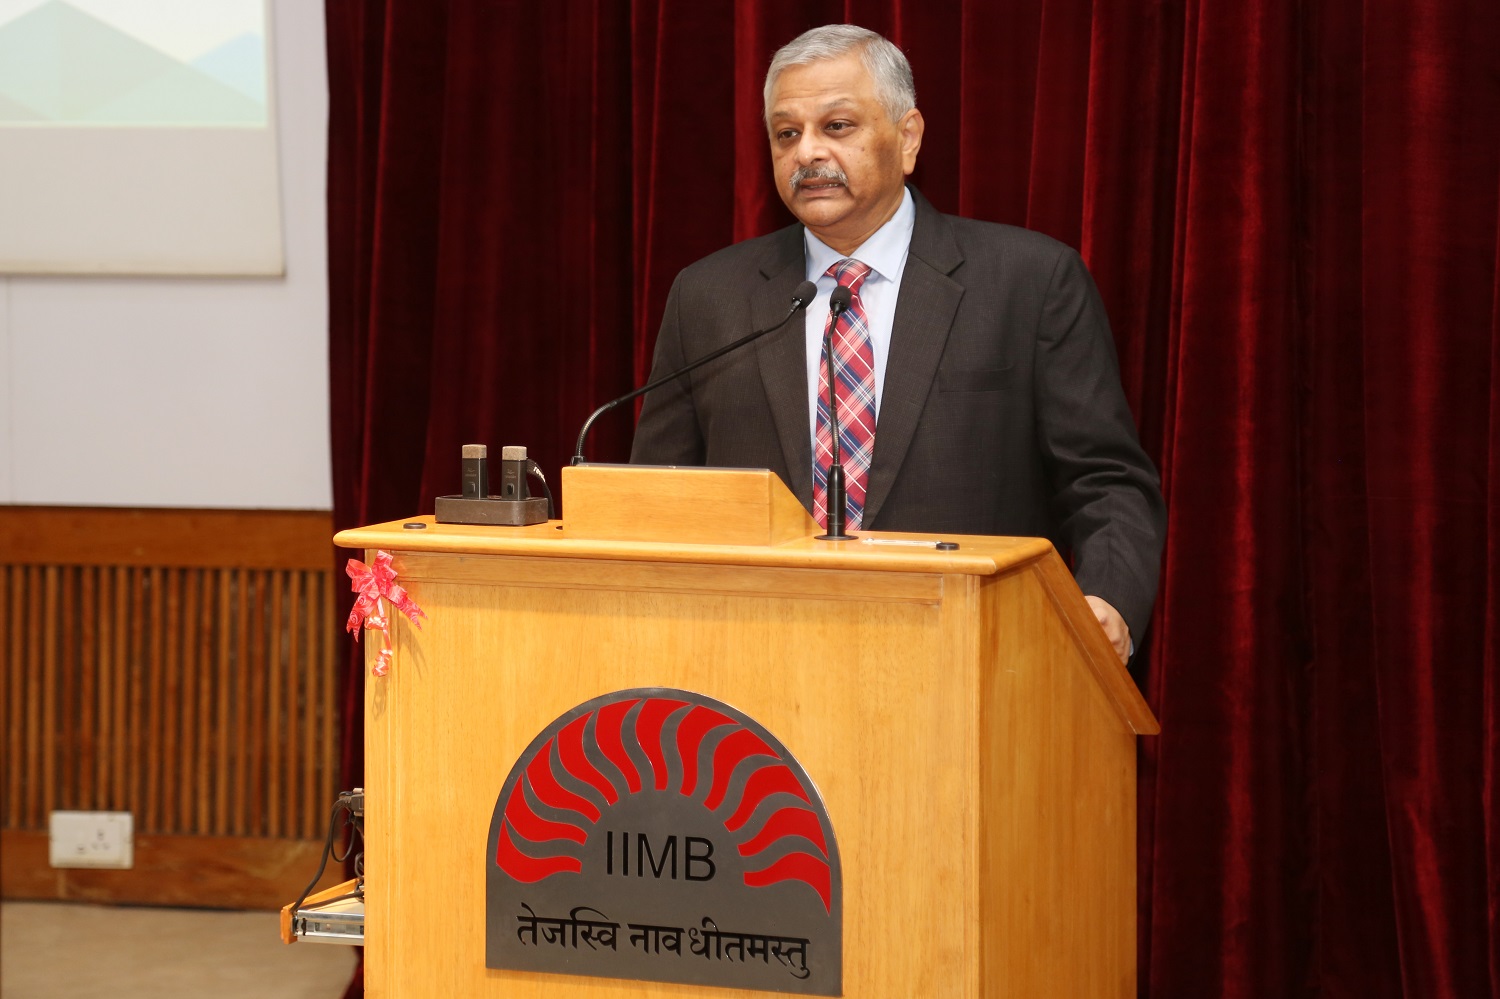 Shri C. Chandramouli, IAS (Retired), Former Registrar General and Former Secretary, DoPT, delivers the talk on ‘Public Policy in India, Empirical Evidence: The Missing Link’, at the XVII International Conference on Public Policy & Management at IIM Bangalore, on 23rd August 2022.